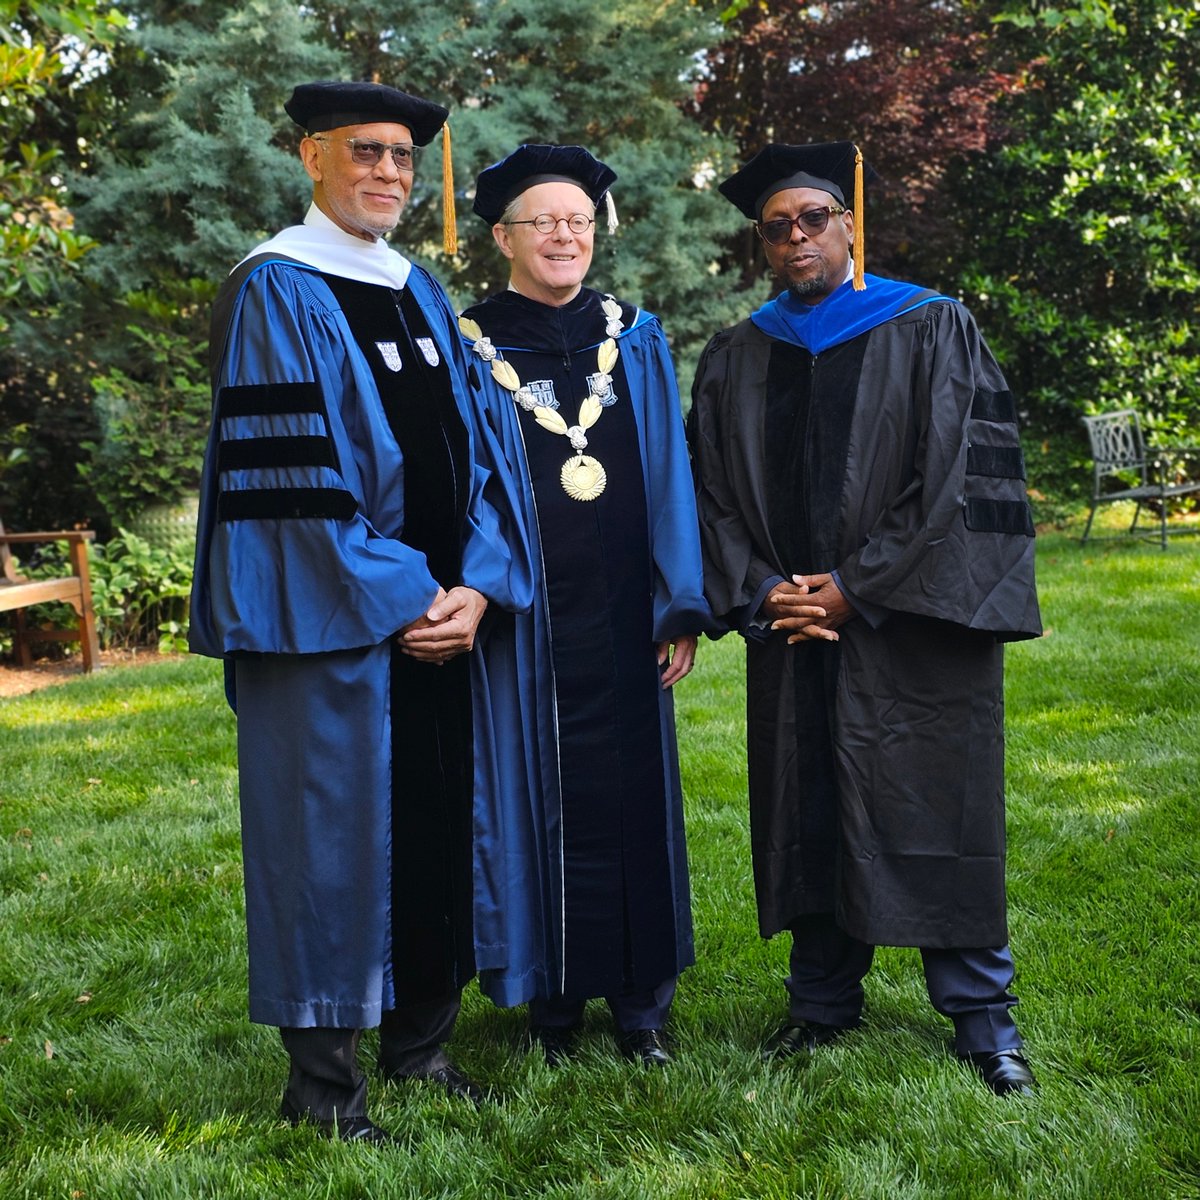 .@DukeAAAS's Mark Anthony Neal served as Faculty Sponsor for Dr. Claudius C.B. Claiborne, who received an Honorary Doctorate from @DukeU. Dr. Claiborne arrived at Duke in 1965 as a Presidential Merit Scholar and became Duke's first Black Scholar-Athlete.